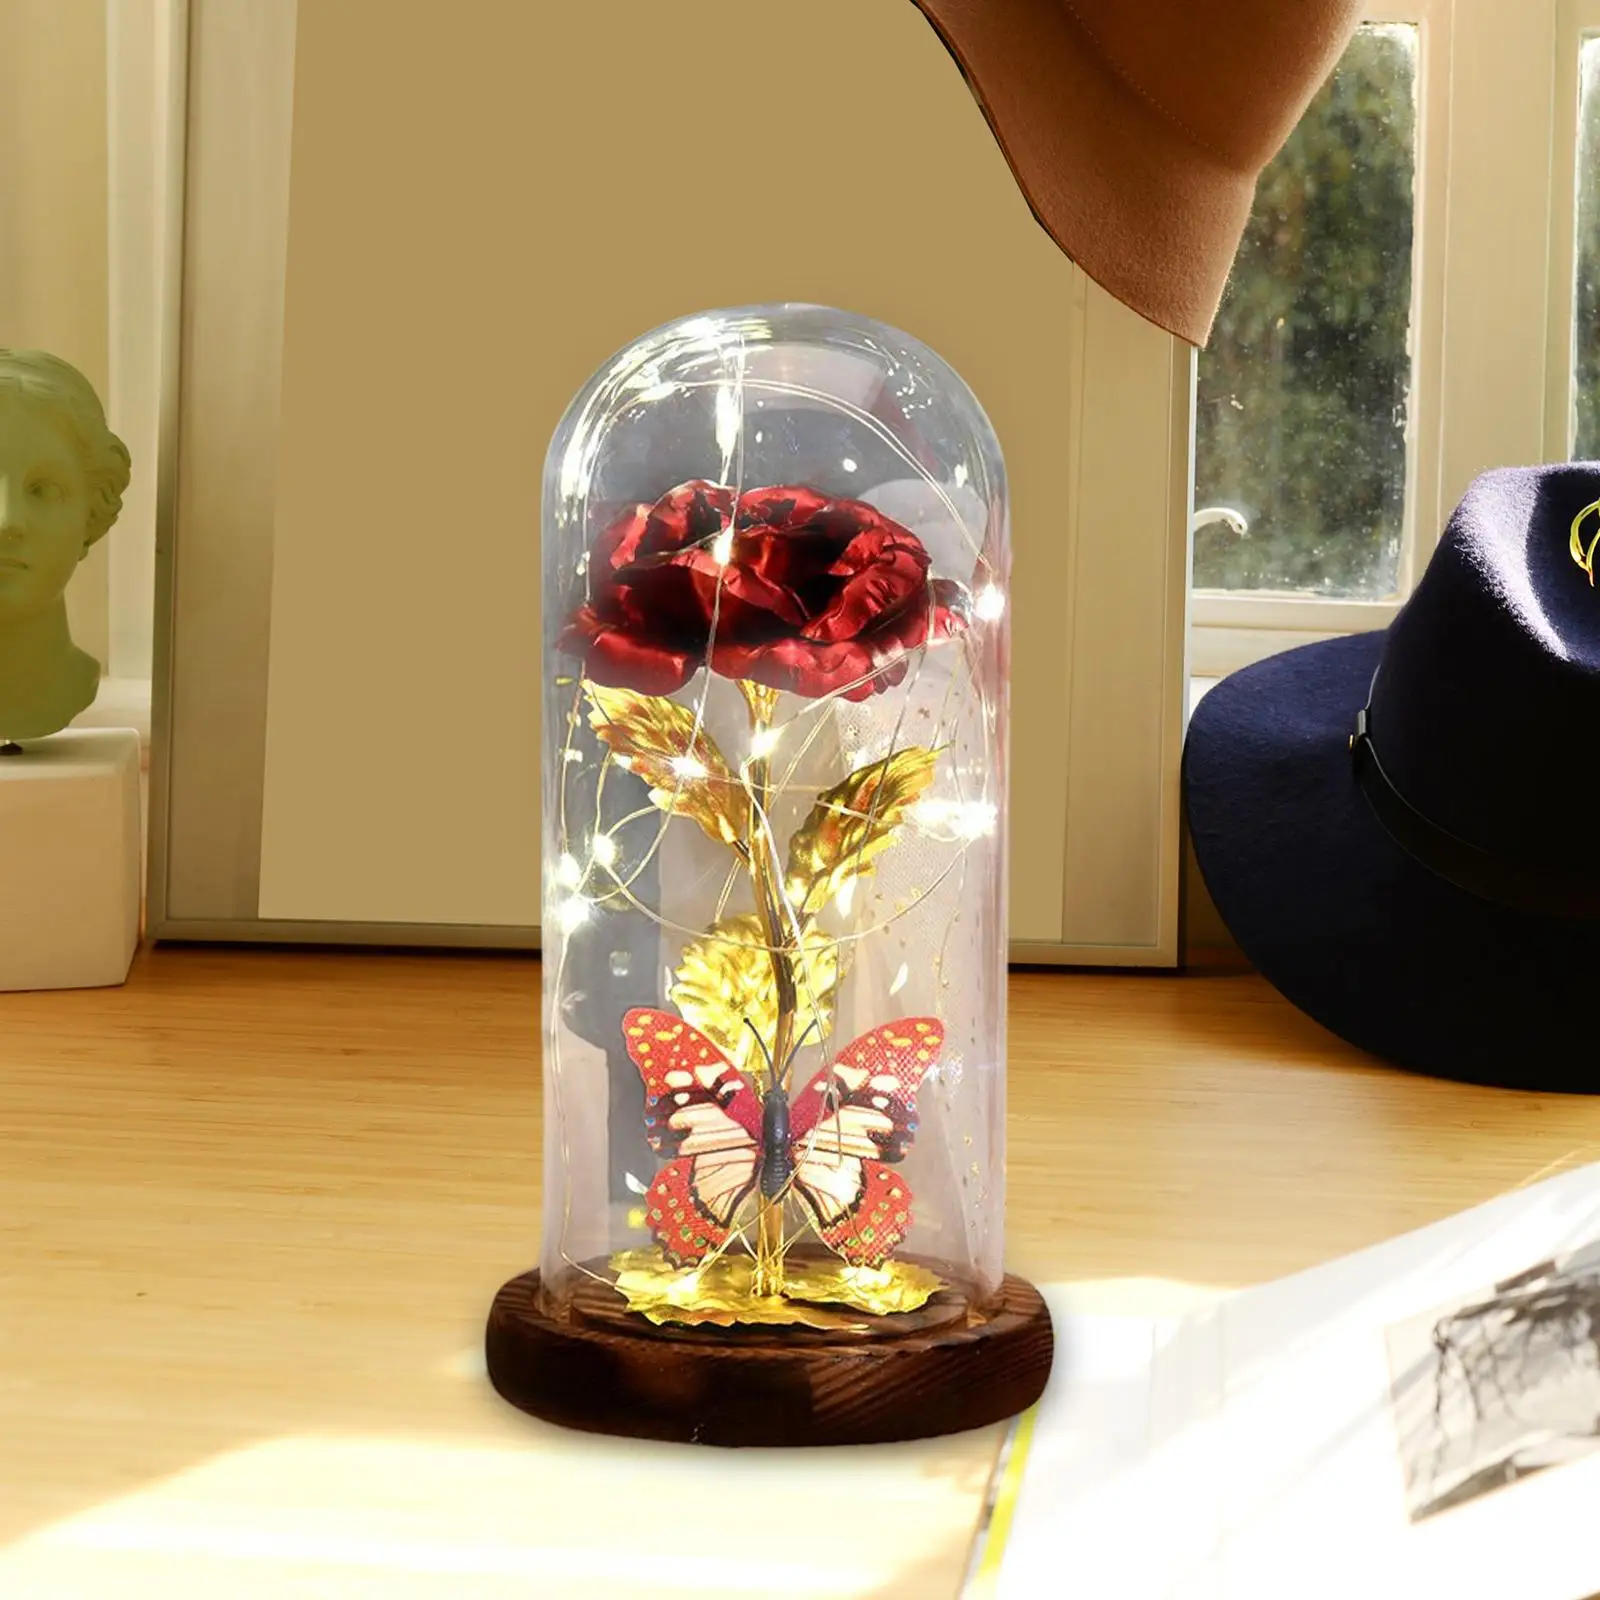 Butterfly Rose Flower Ornaments Bedside Lamp Crafts Glass Cover Creative LED Light for Desktop Fireplace Party Gift Home Decor